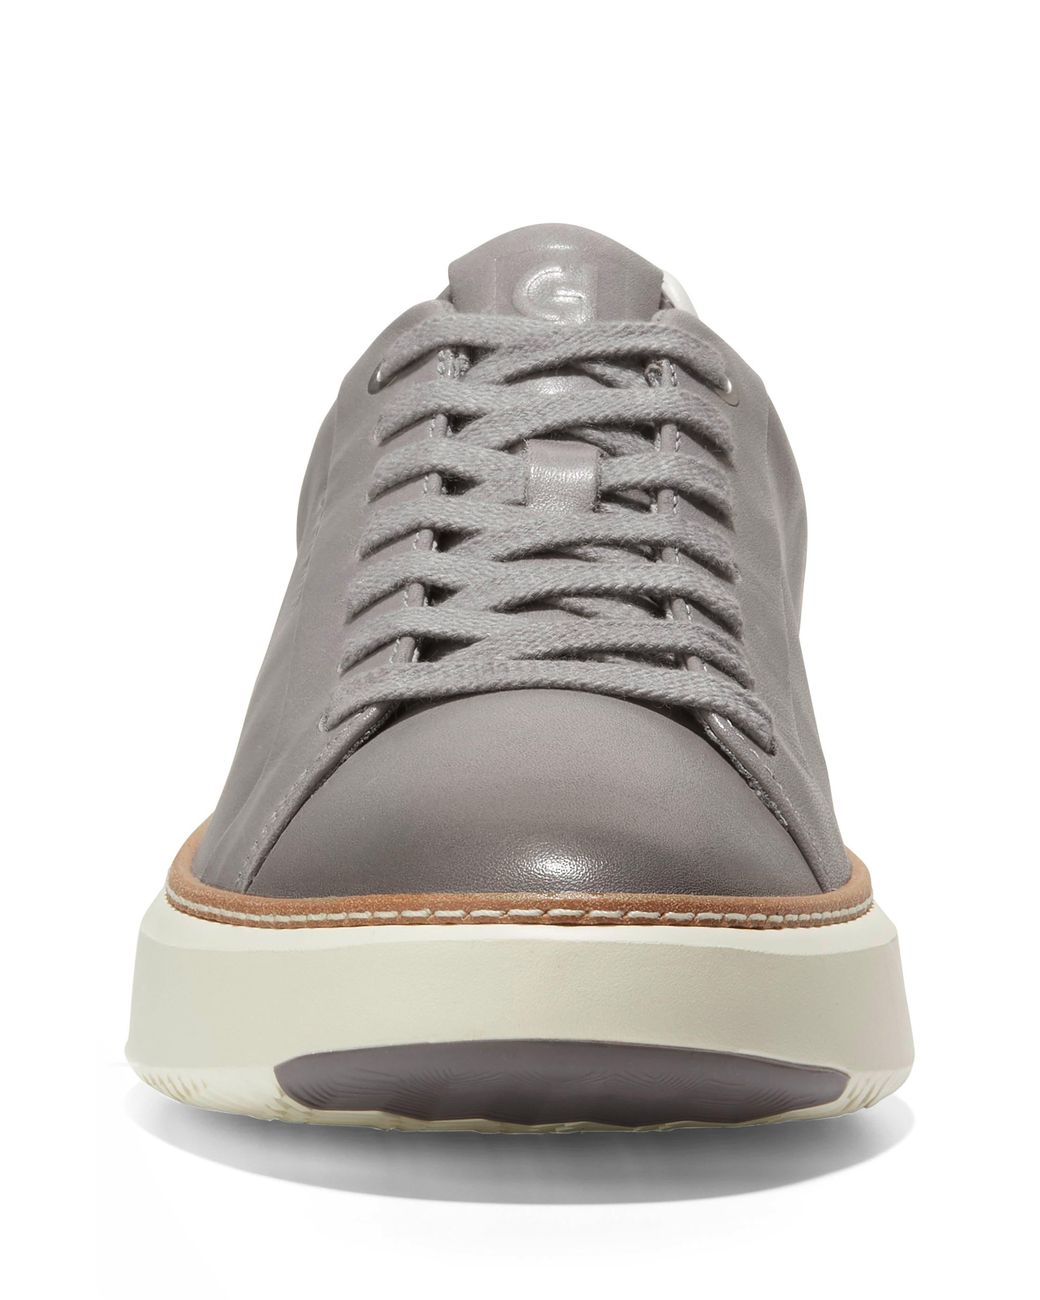 Cole Haan Grandpro Topspin Sneaker In Dark Gray Leather At Nordstrom Rack  for Men | Lyst